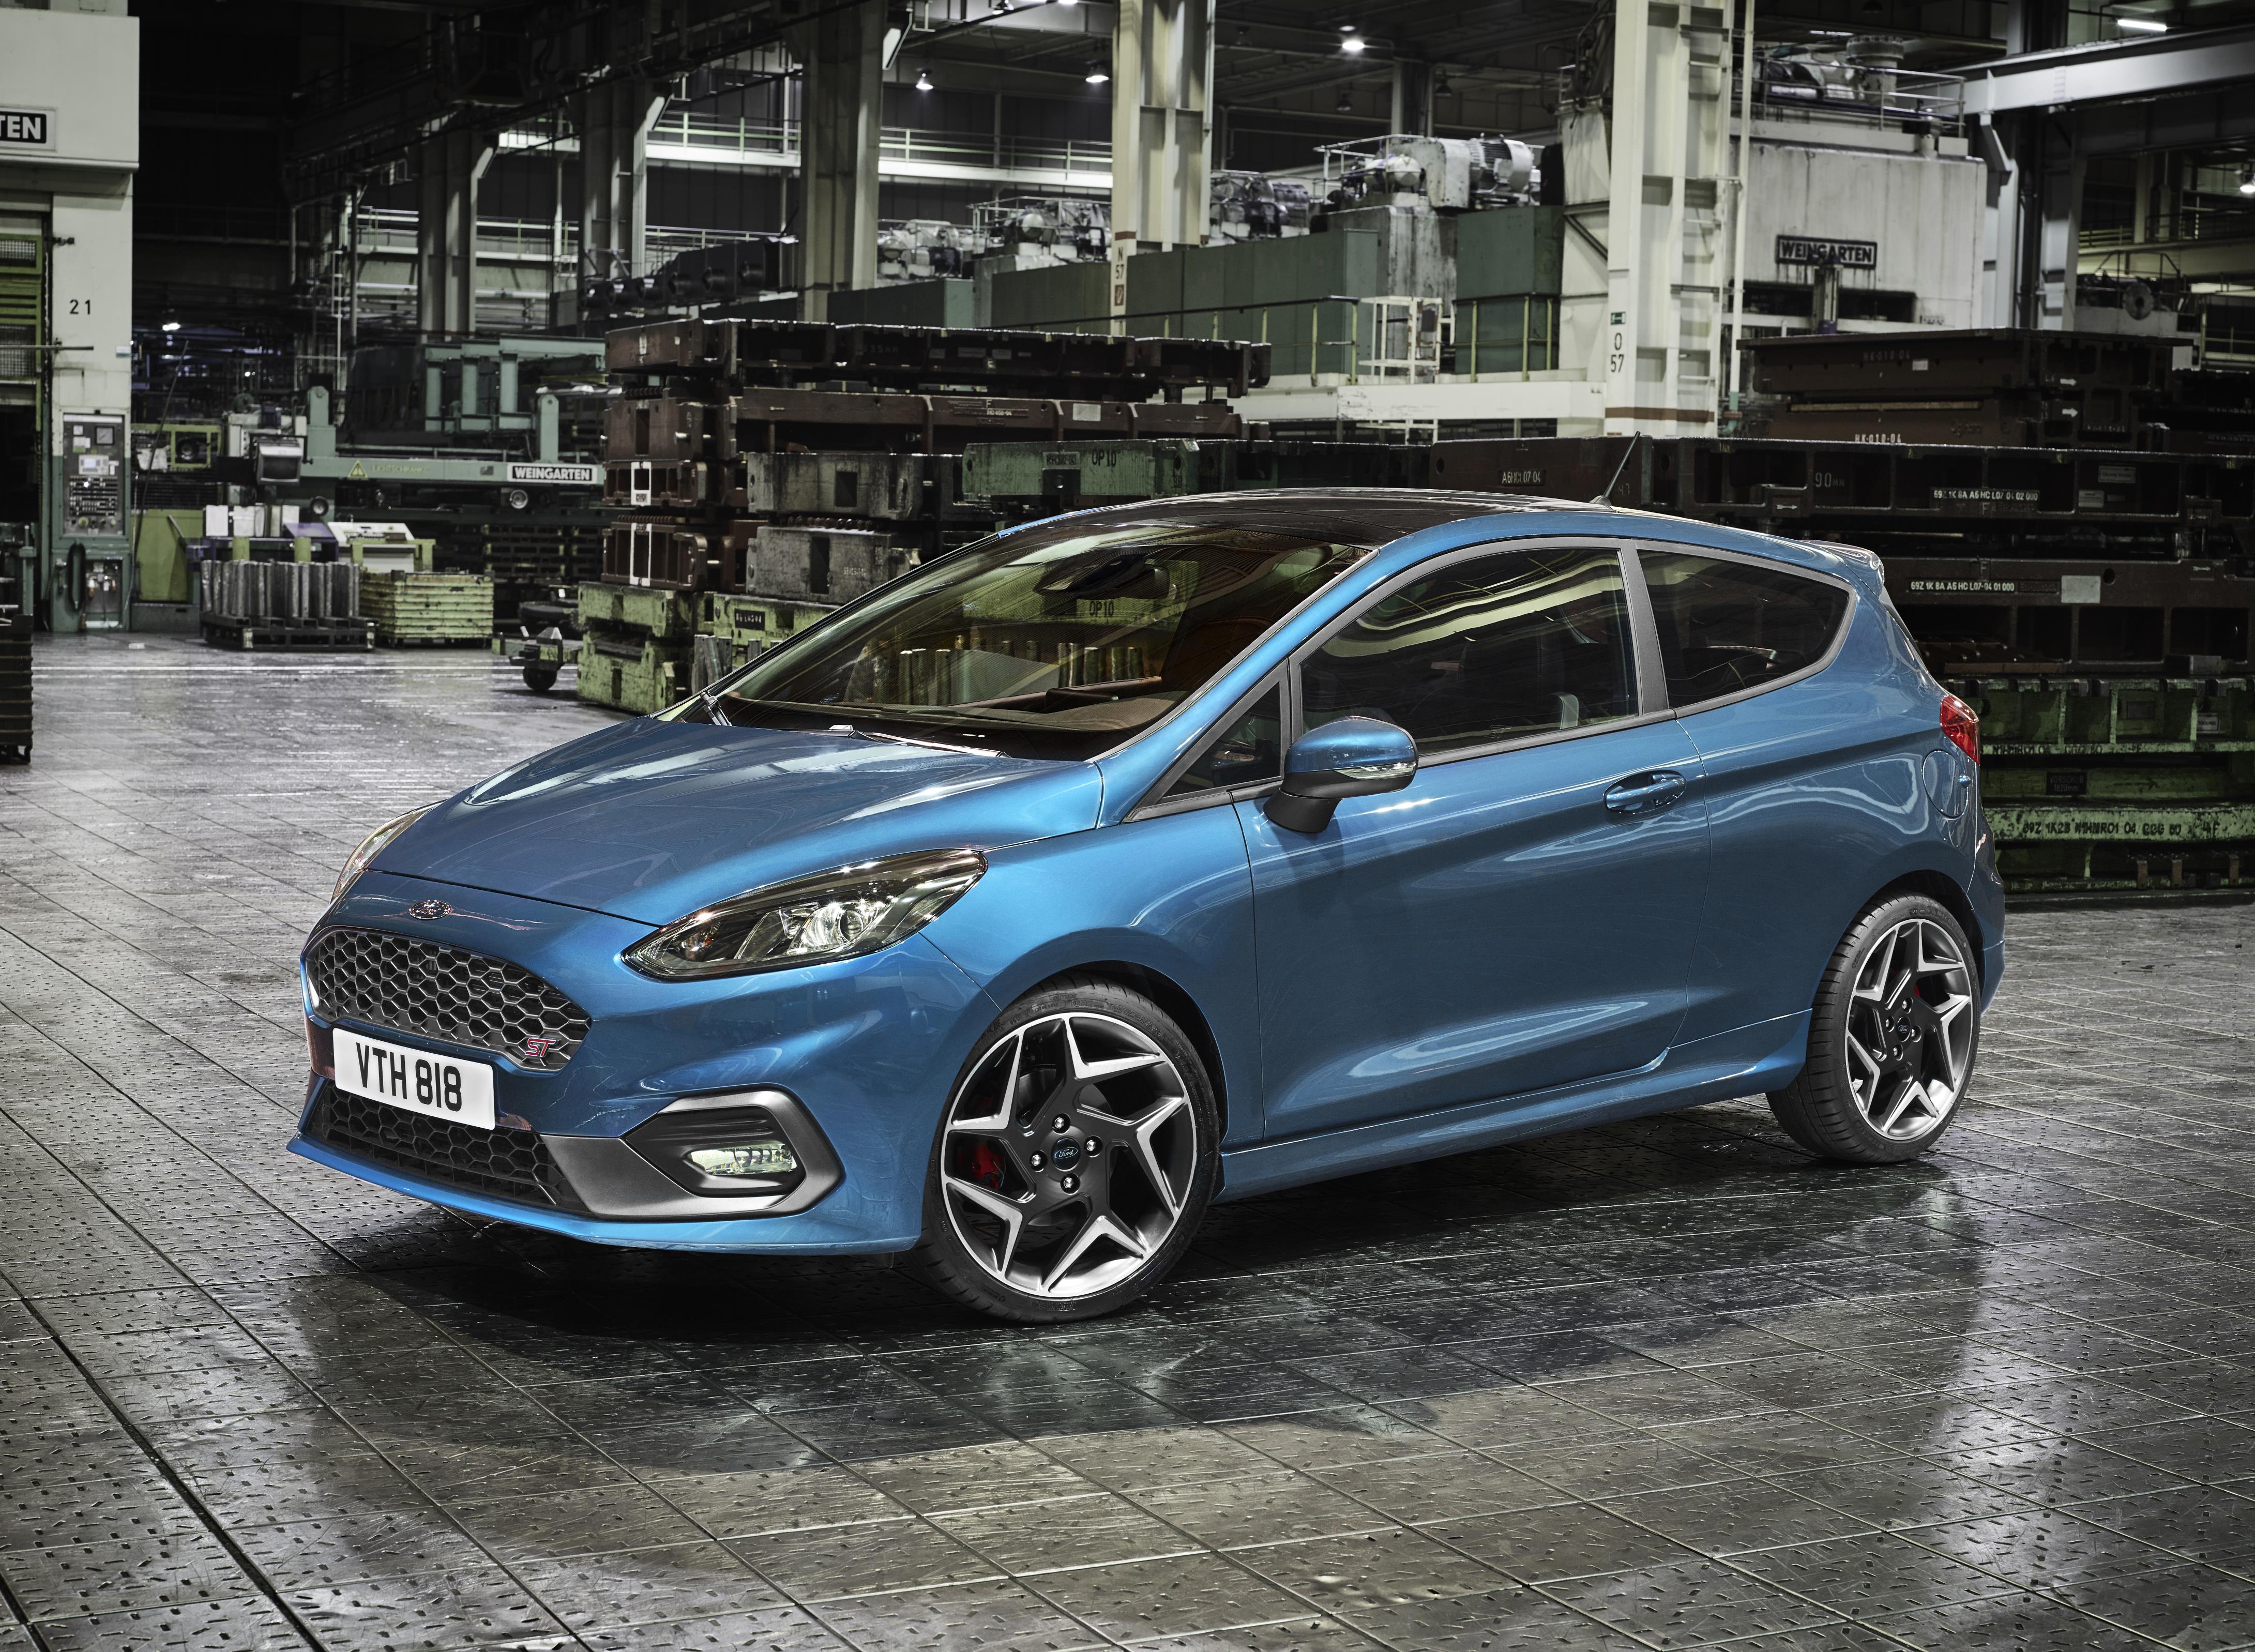 Ford Fiesta Mk8 Won't Arrive In The U.S. As Subcompact Sales